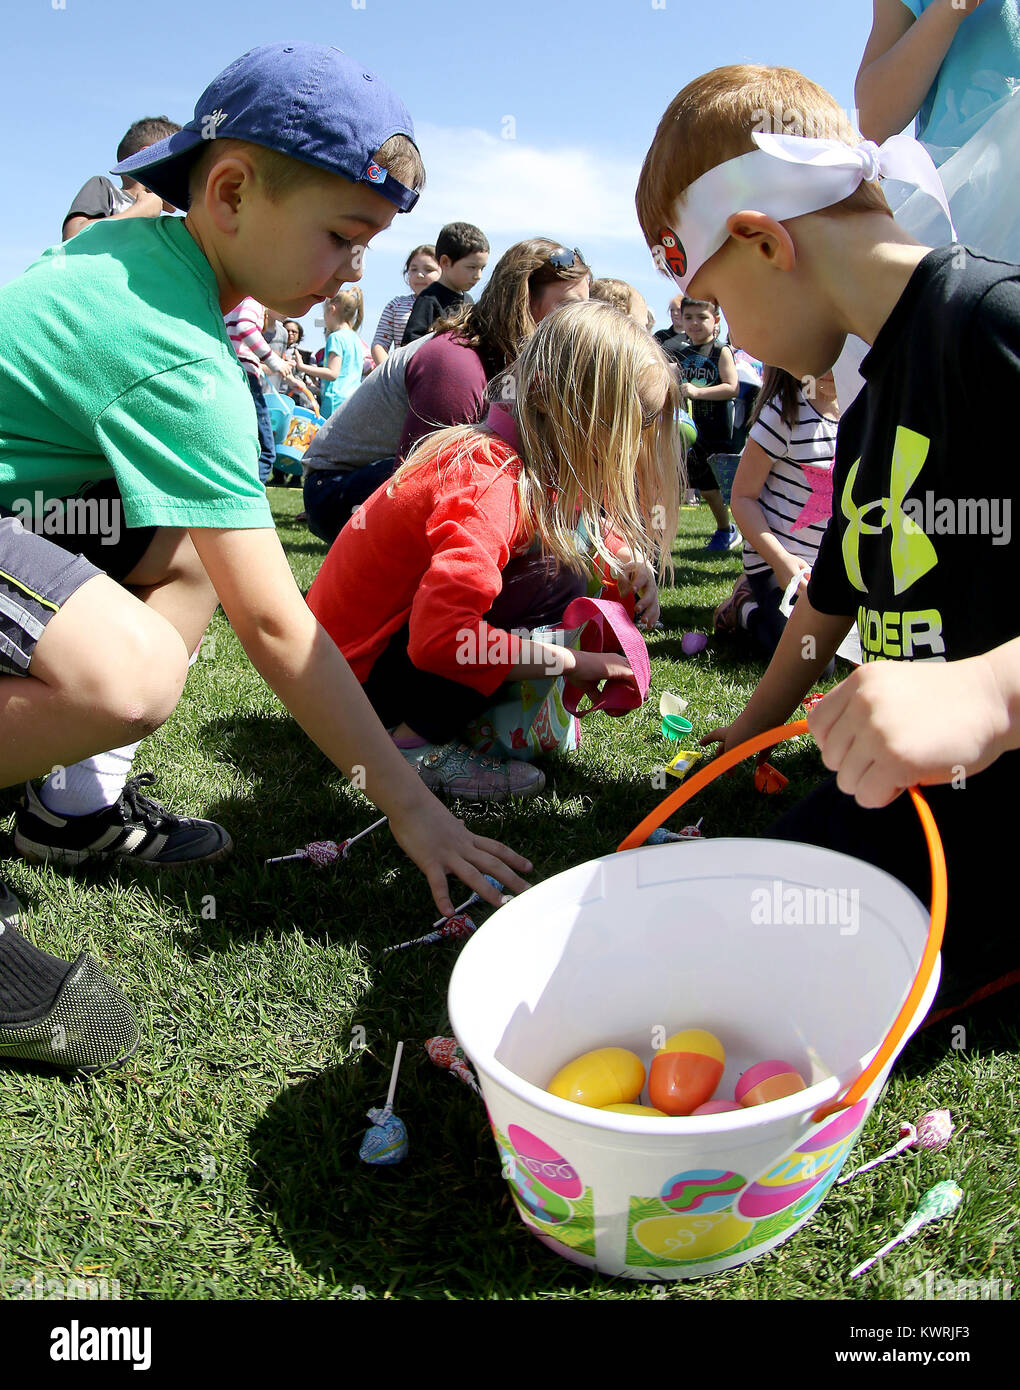 Bettendorf, Iowa, USA. 8th Apr, 2017. Kids 5-7 years-old swarm over the field filled with plastic eggs and goddies to put in their baskets, Saturday, April 8, 2017, during the annual Bettendorf Easter Egg Hunt held at Crow Creek Park in Bettendorf. Credit: John Schultz/Quad-City Times/ZUMA Wire/Alamy Live News Stock Photo